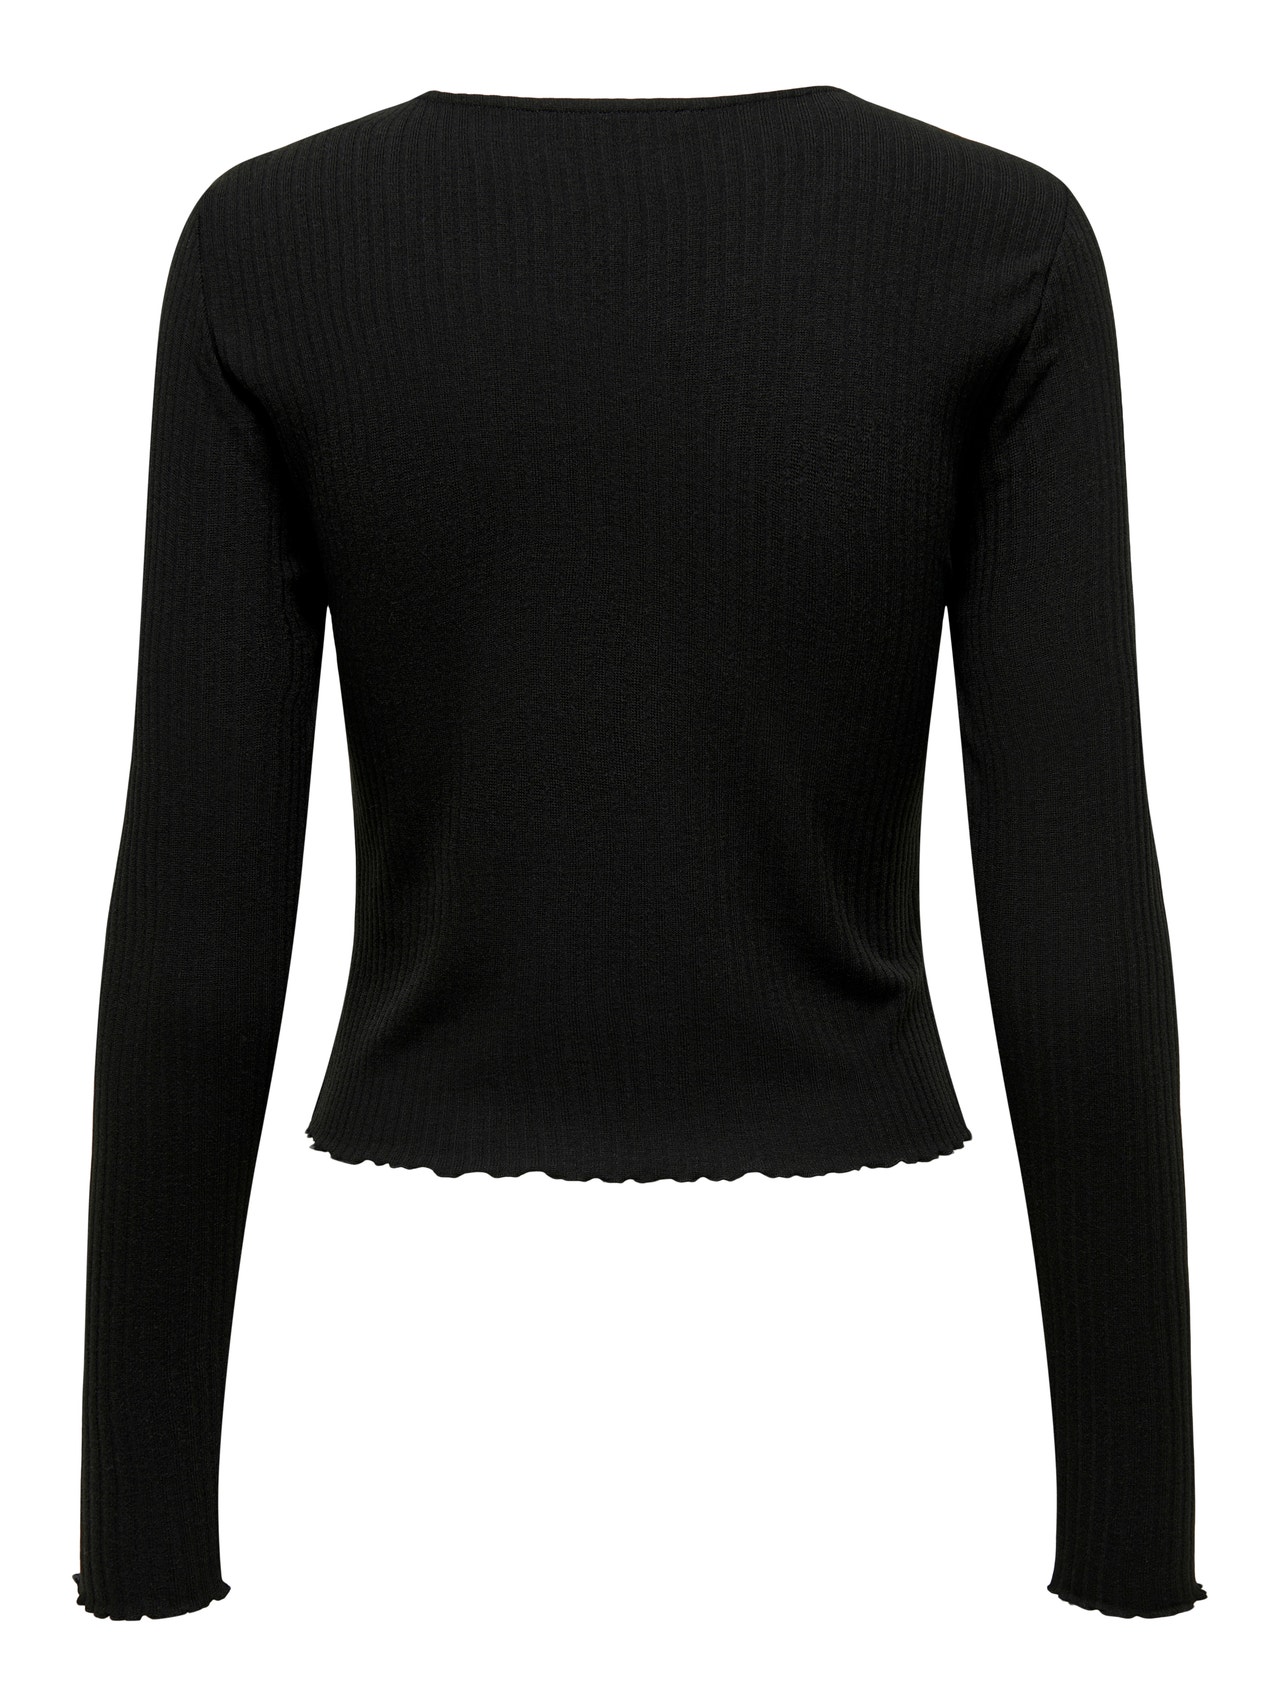 ONLY O-neck top -Black - 15298796